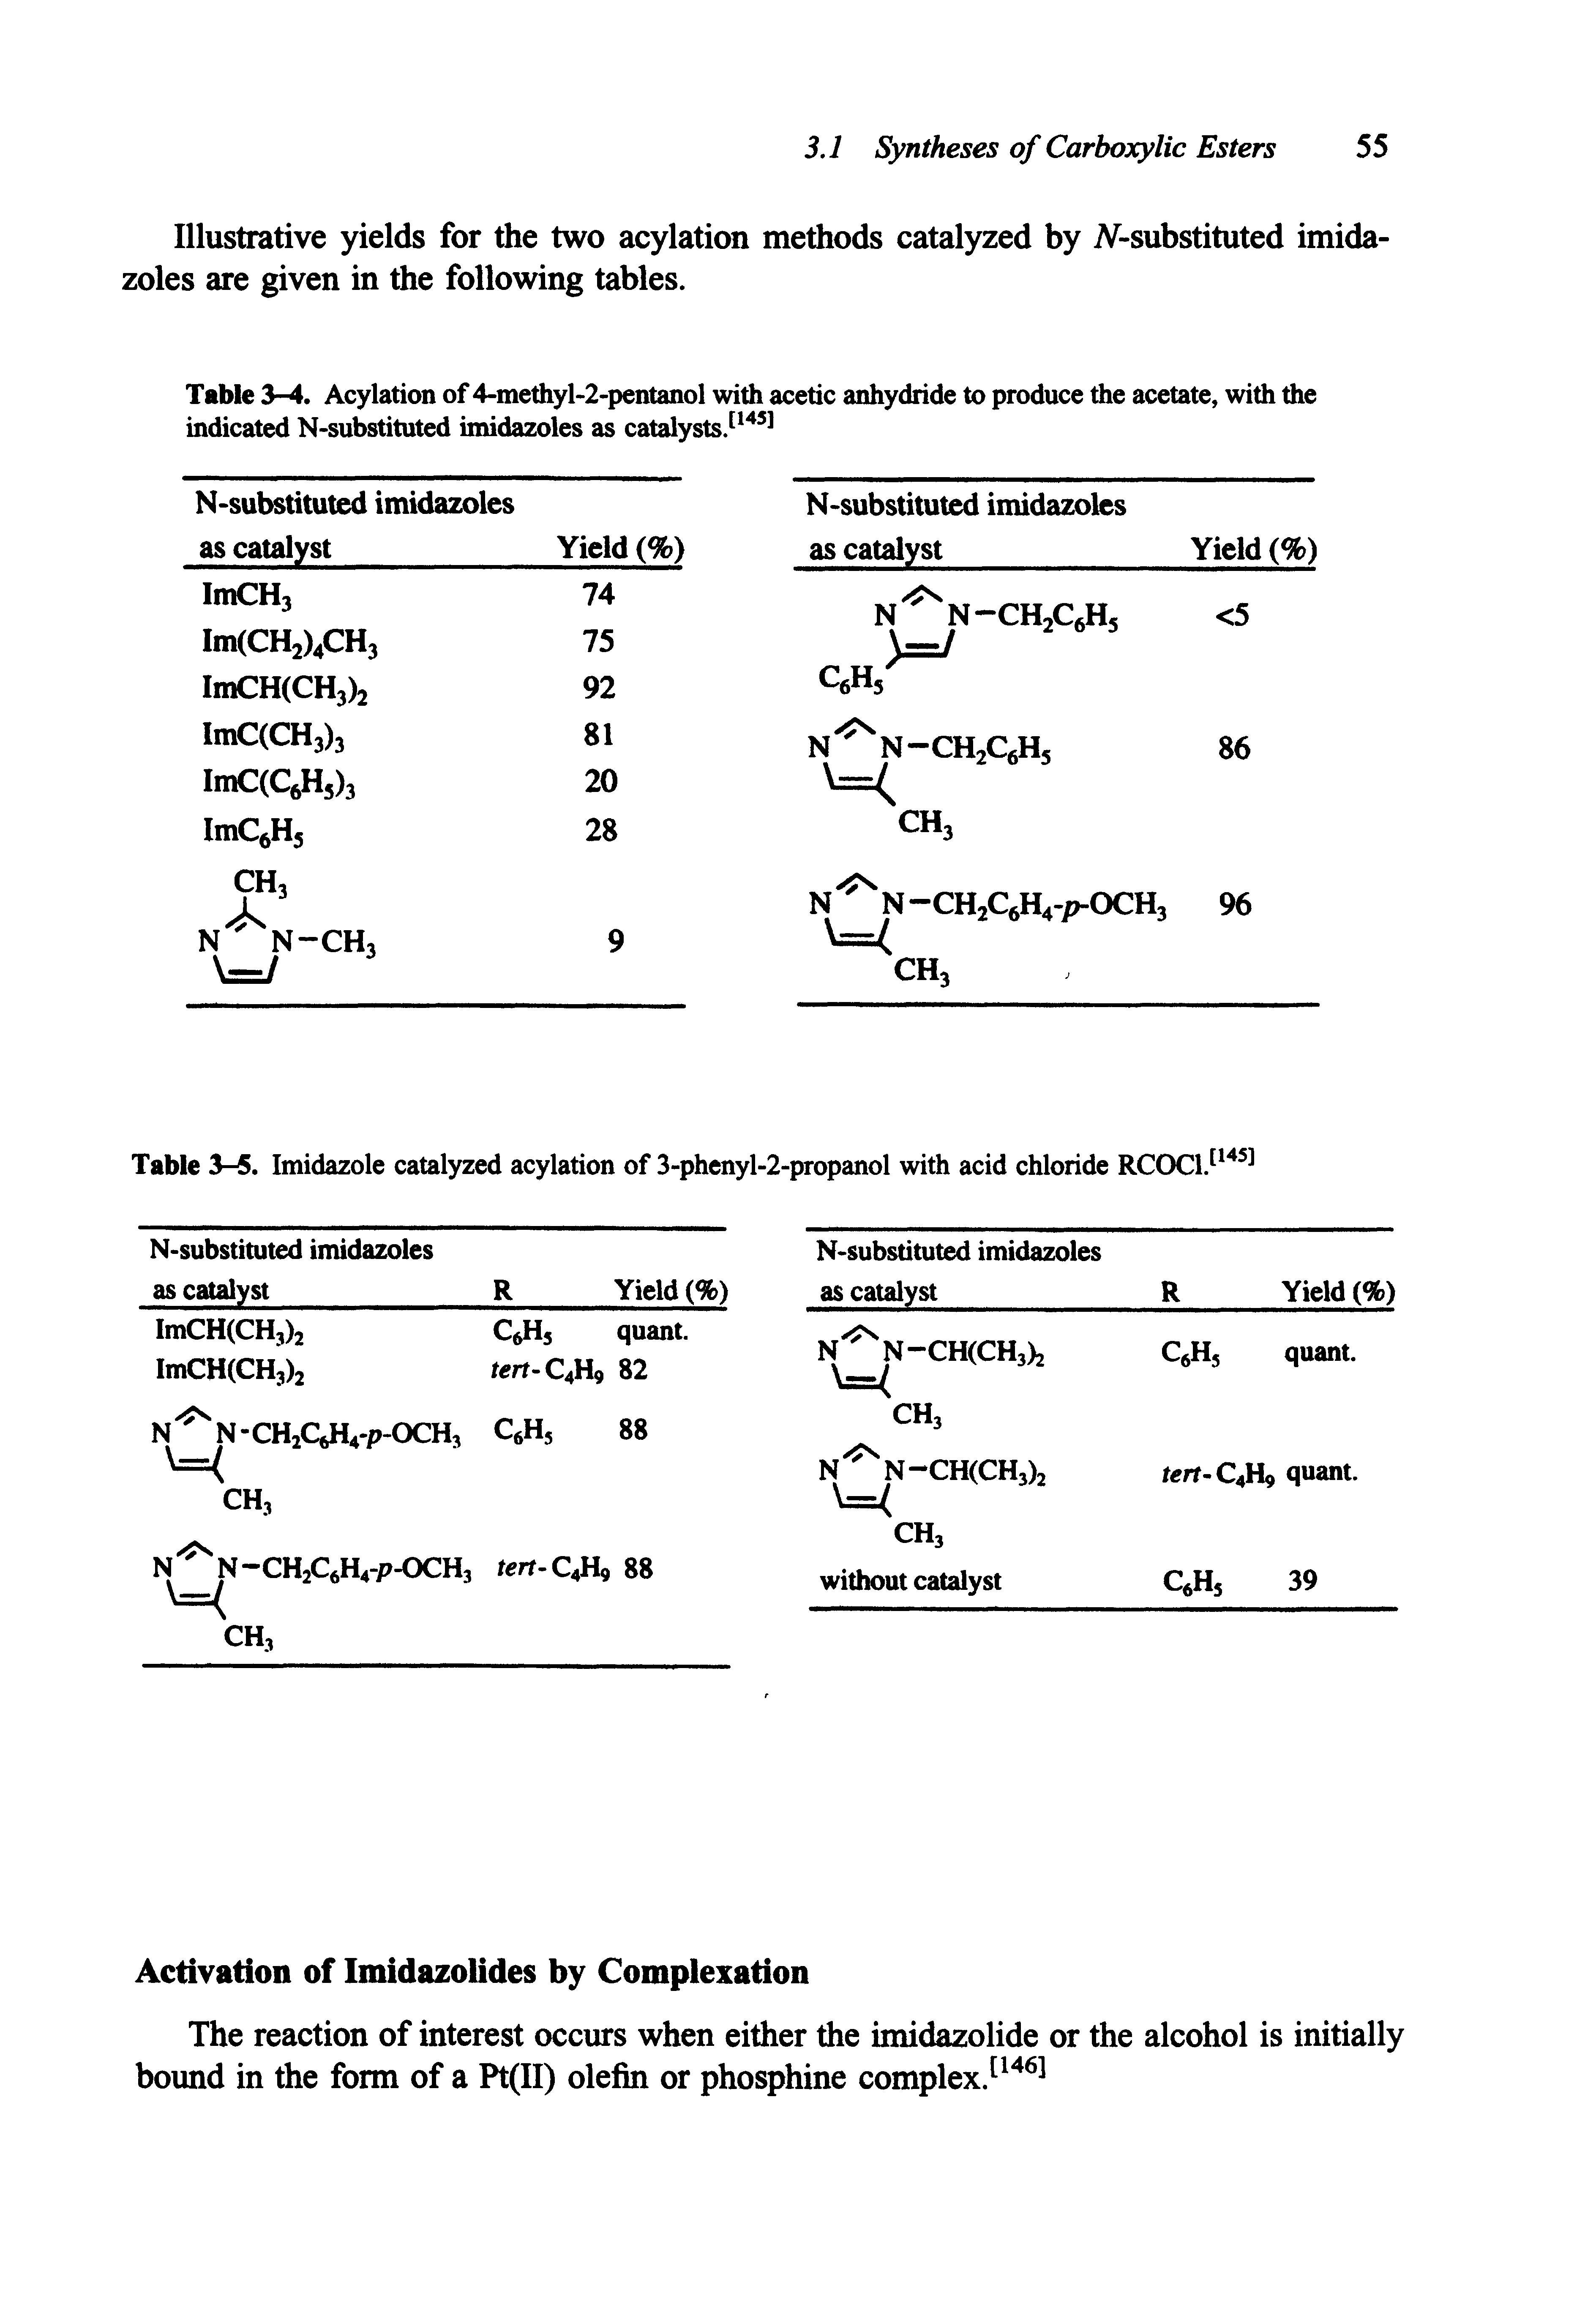 Table 3-4. Acylation of 4-methyl-2-pentanol with acetic anhydride to produce the acetate, with the indicated N-substituted imidazoles as catalysts. 1451...